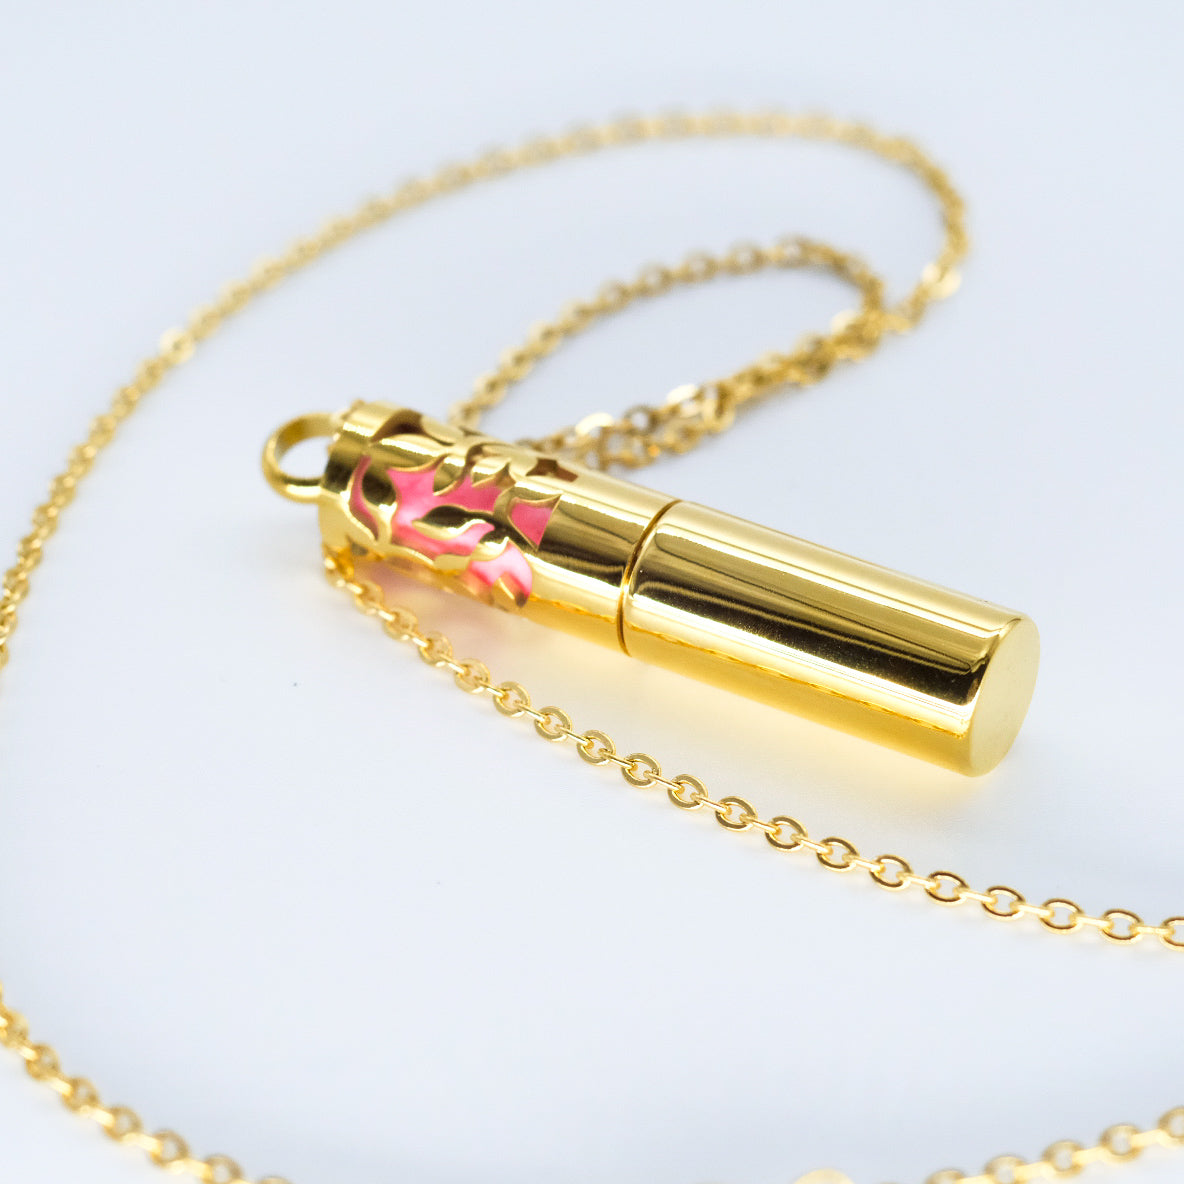 Cylindrical Aromatherapy Necklace with Stainless Steel Container 